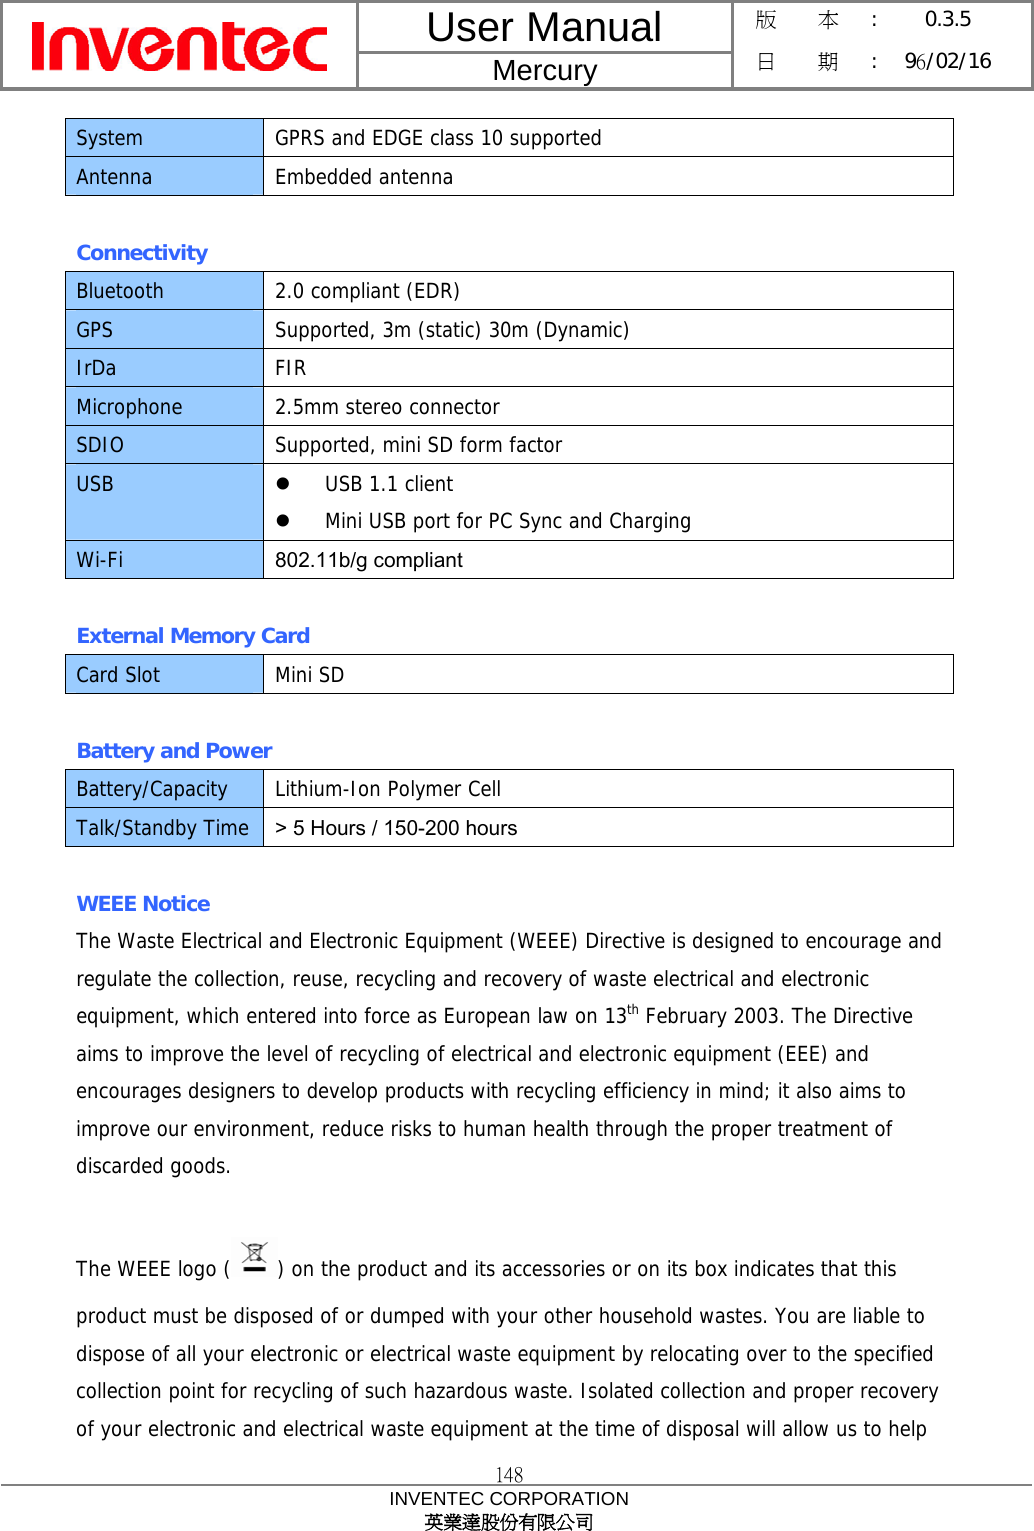 User Manual  Mercury 版    本 :  0.3.5 日    期 : 96/02/16  148 INVENTEC CORPORATION 英業達股份有限公司  System  GPRS and EDGE class 10 supported Antenna Embedded antenna  Connectivity Bluetooth  2.0 compliant (EDR) GPS  Supported, 3m (static) 30m (Dynamic) IrDa FIR Microphone  2.5mm stereo connector SDIO  Supported, mini SD form factor USB  z USB 1.1 client z Mini USB port for PC Sync and Charging Wi-Fi  802.11b/g compliant  External Memory Card Card Slot  Mini SD  Battery and Power Battery/Capacity  Lithium-Ion Polymer Cell Talk/Standby Time  &gt; 5 Hours / 150-200 hours  WEEE Notice The Waste Electrical and Electronic Equipment (WEEE) Directive is designed to encourage and regulate the collection, reuse, recycling and recovery of waste electrical and electronic equipment, which entered into force as European law on 13th February 2003. The Directive aims to improve the level of recycling of electrical and electronic equipment (EEE) and encourages designers to develop products with recycling efficiency in mind; it also aims to improve our environment, reduce risks to human health through the proper treatment of discarded goods.  The WEEE logo ( ) on the product and its accessories or on its box indicates that this product must be disposed of or dumped with your other household wastes. You are liable to dispose of all your electronic or electrical waste equipment by relocating over to the specified collection point for recycling of such hazardous waste. Isolated collection and proper recovery of your electronic and electrical waste equipment at the time of disposal will allow us to help 